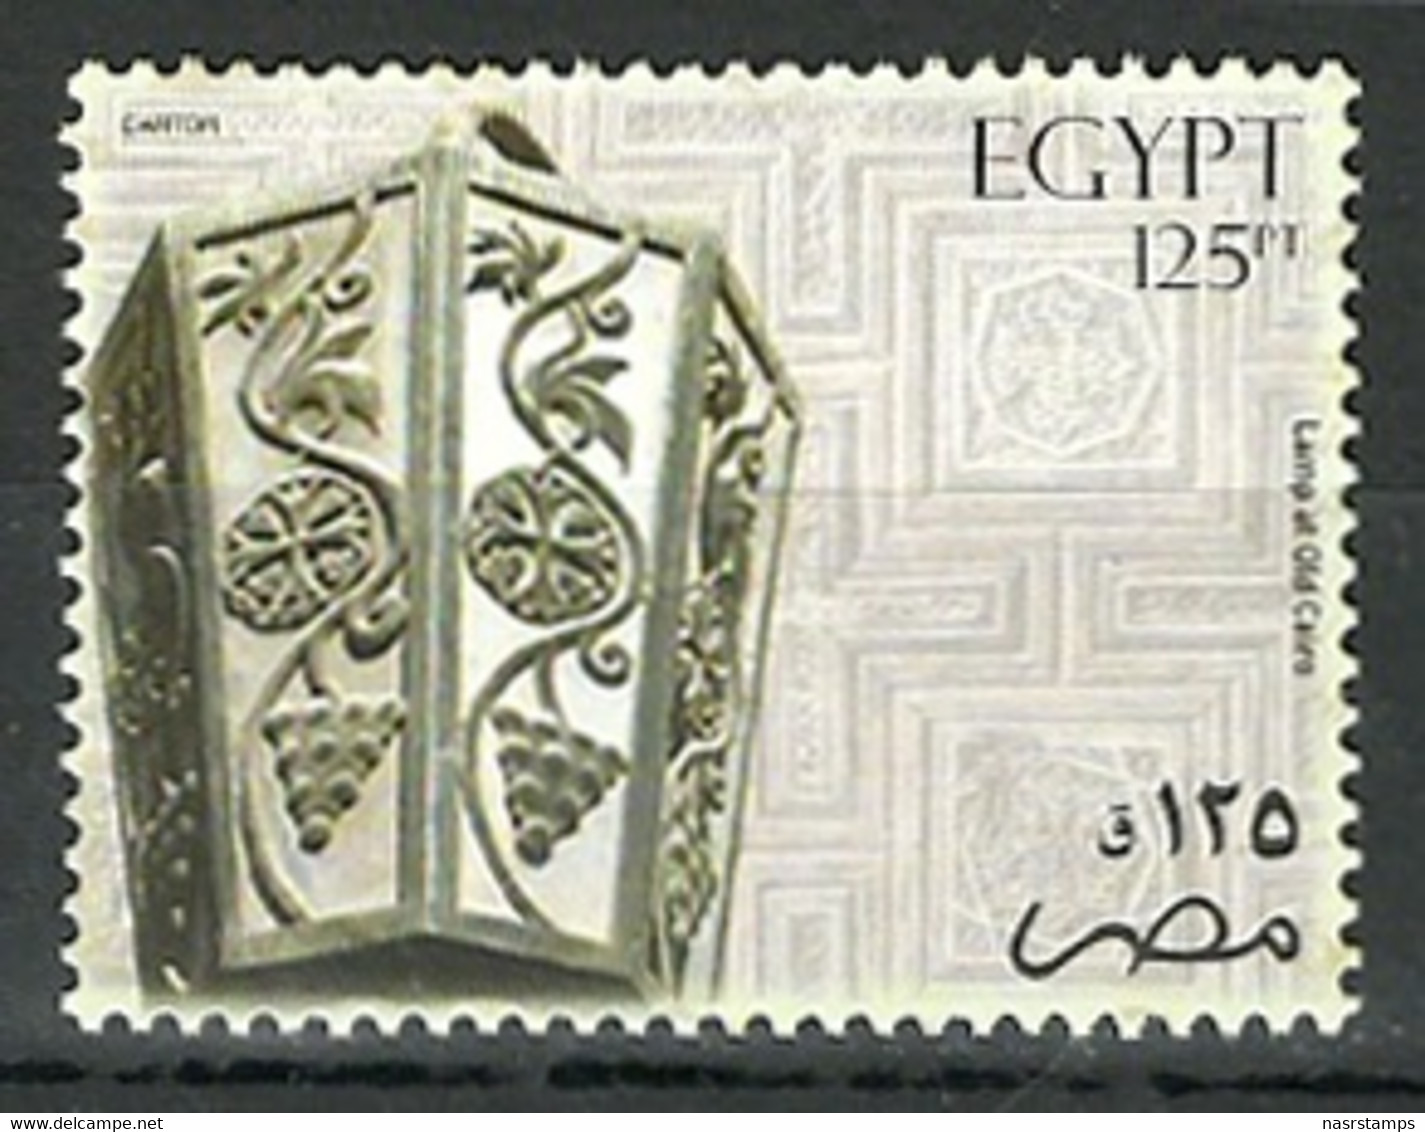 Egypt - 2004 - ( Treasures Of Egypt Booklet ) - Pharaohs - C.V. 50 US$ -- 22 Pages Include The Gold Stamps - Aegyptologie